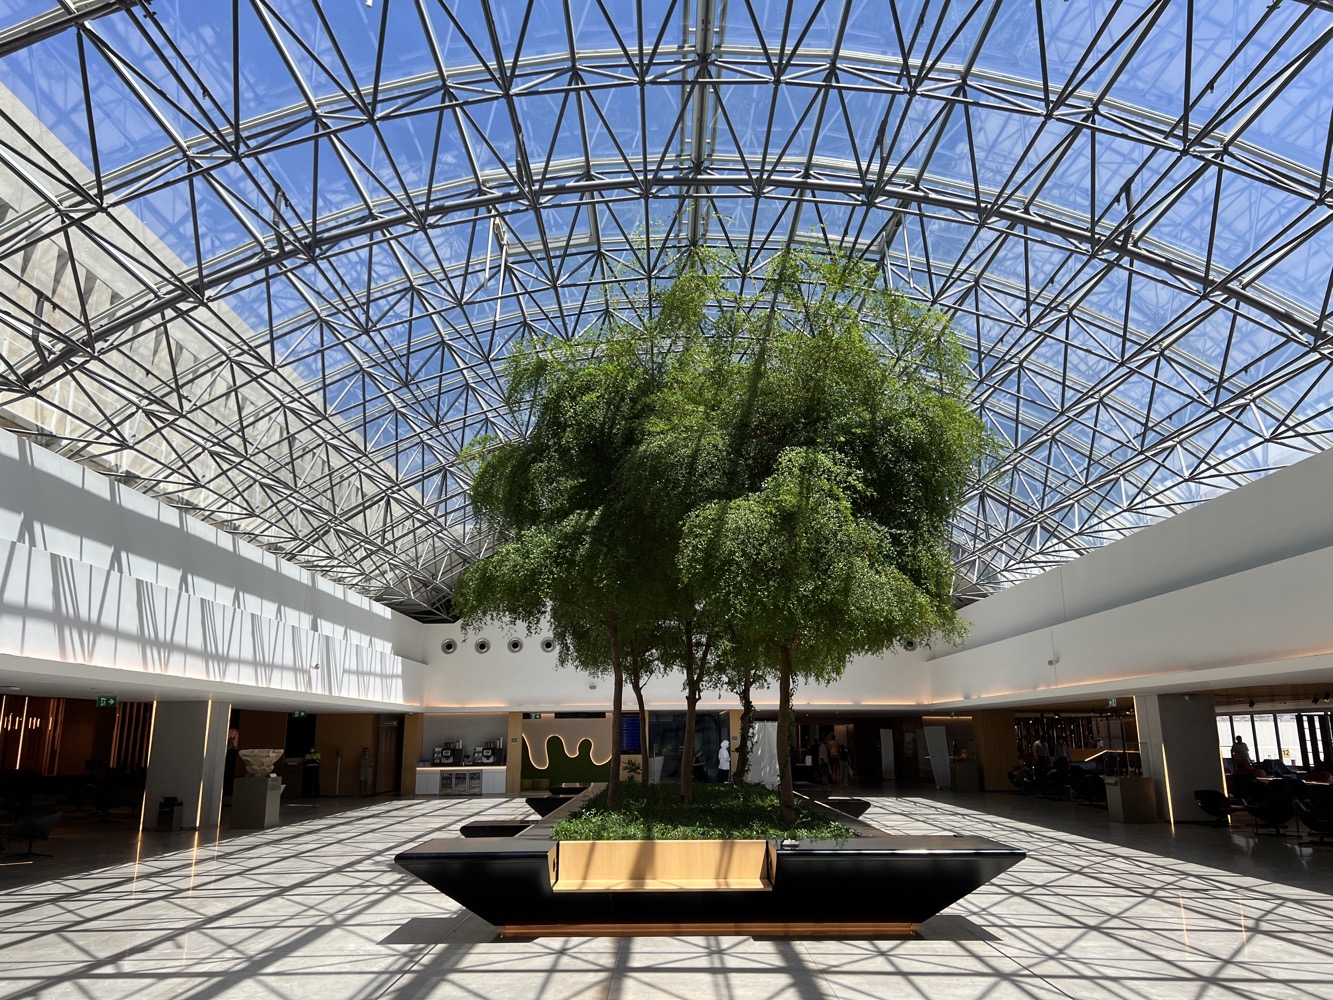 The center piece of the MEA Cedar Lounge is this tree surrounded by open roof natural lighting. (I mistaken it for Cedar Tree earlier)